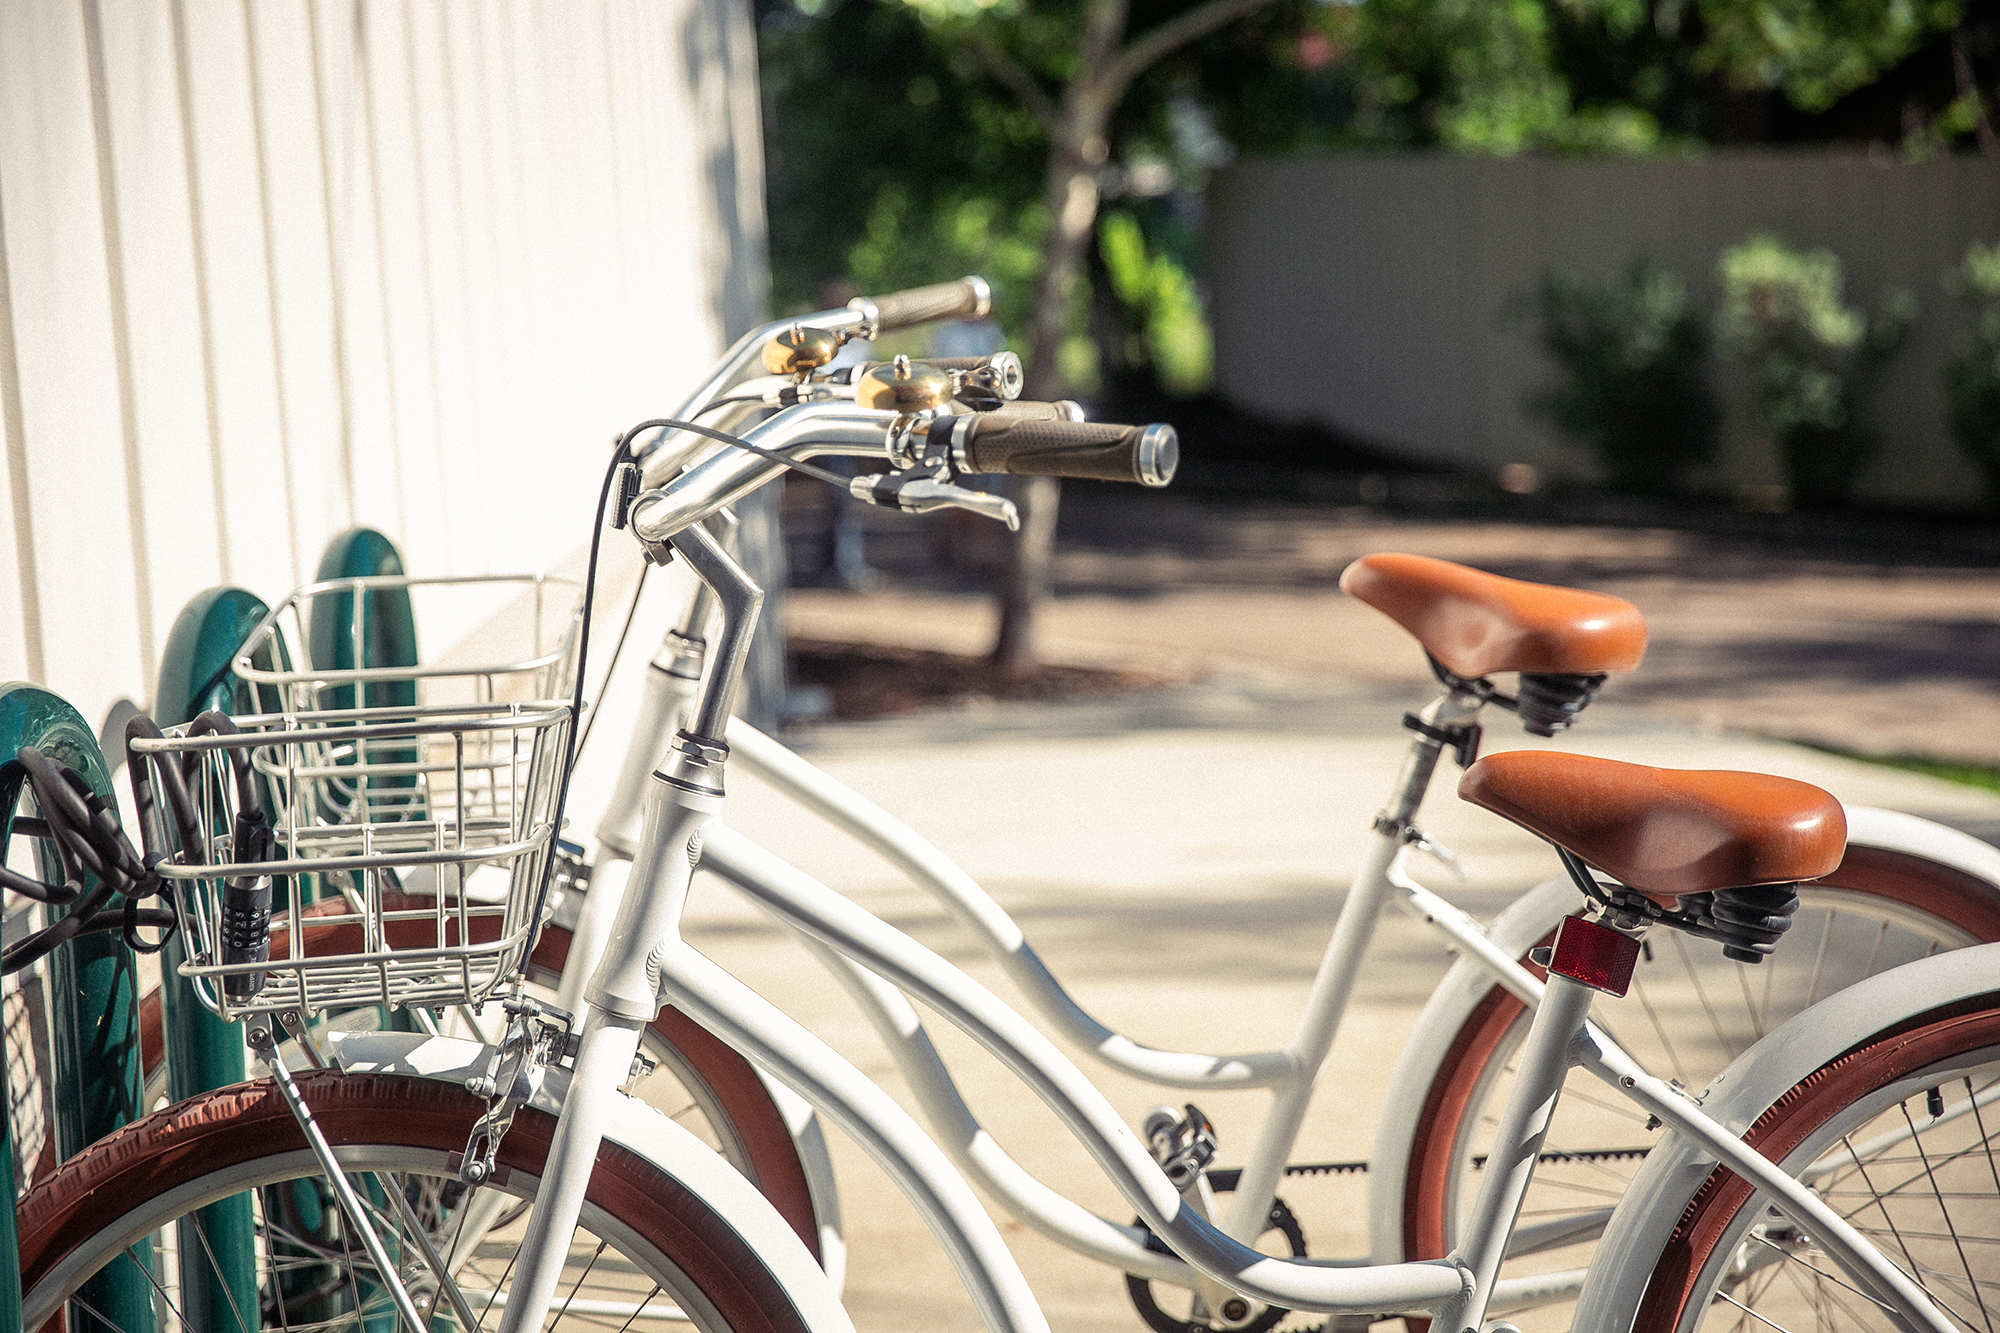 Vintage-style bicycles with leather seats and metal baskets parked at the Stagecoach Inn in Salado, Texas.